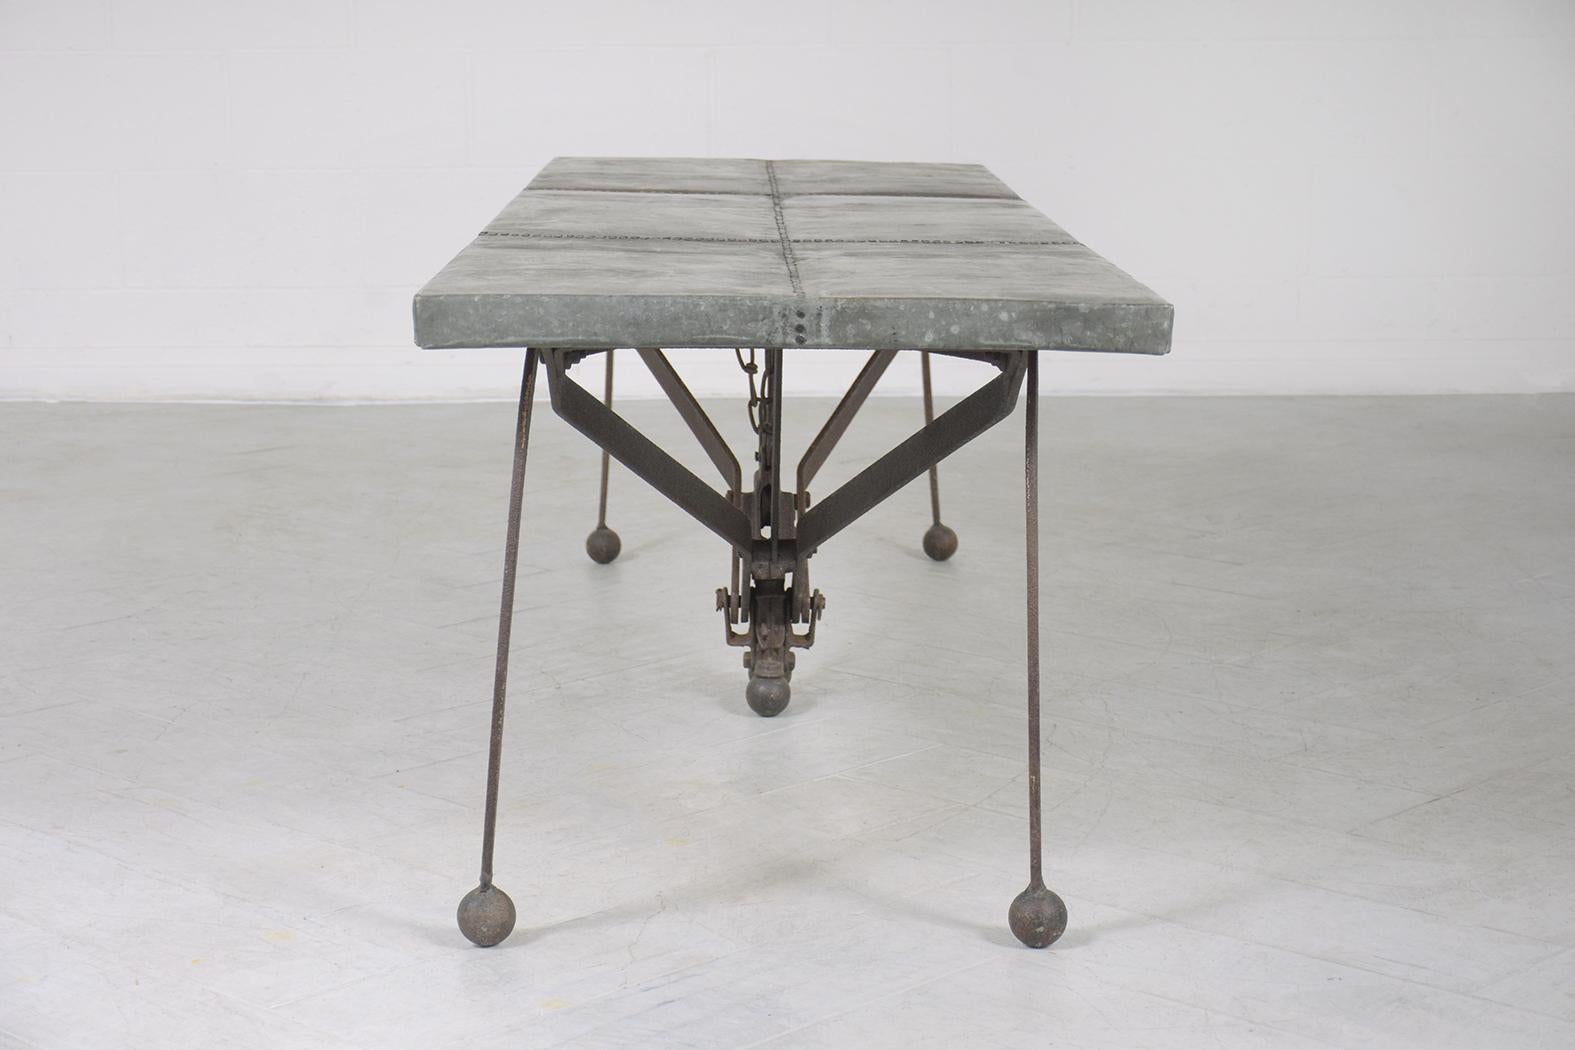 Wood Rustic Iron Modern Coffee Table For Sale